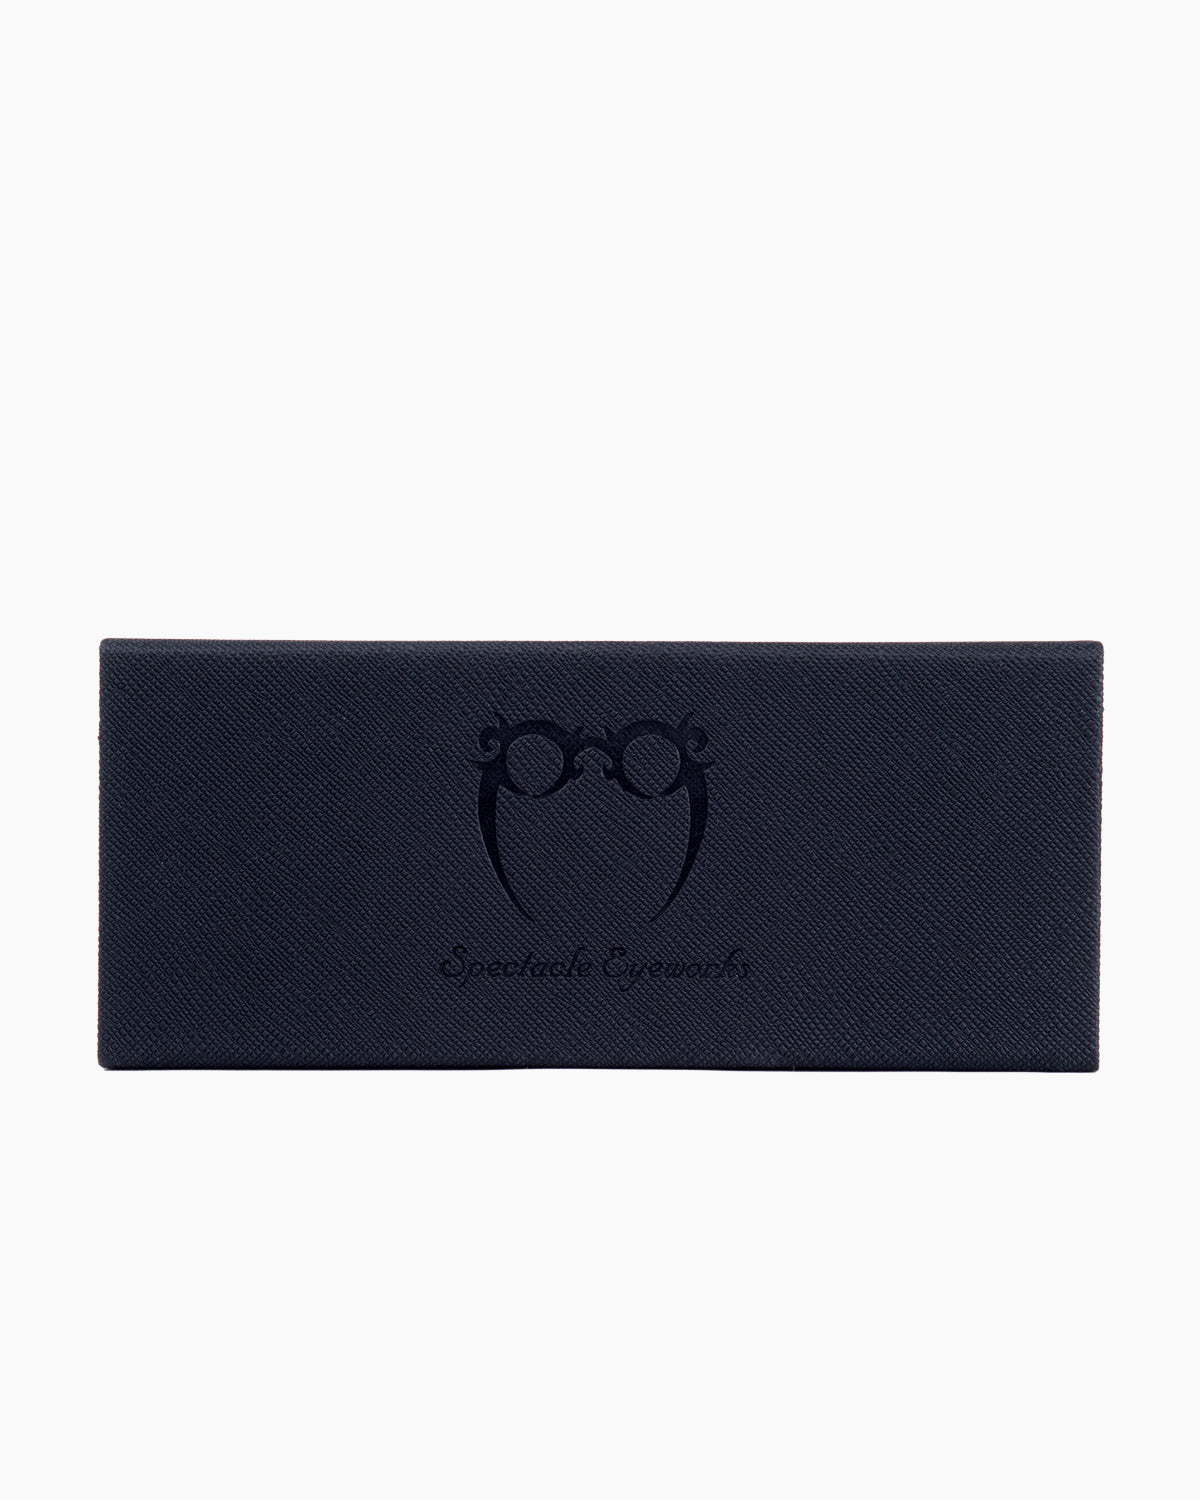 Spectacleeyeworks - JF - 716 | glasses bar:  Marie-Sophie Dion